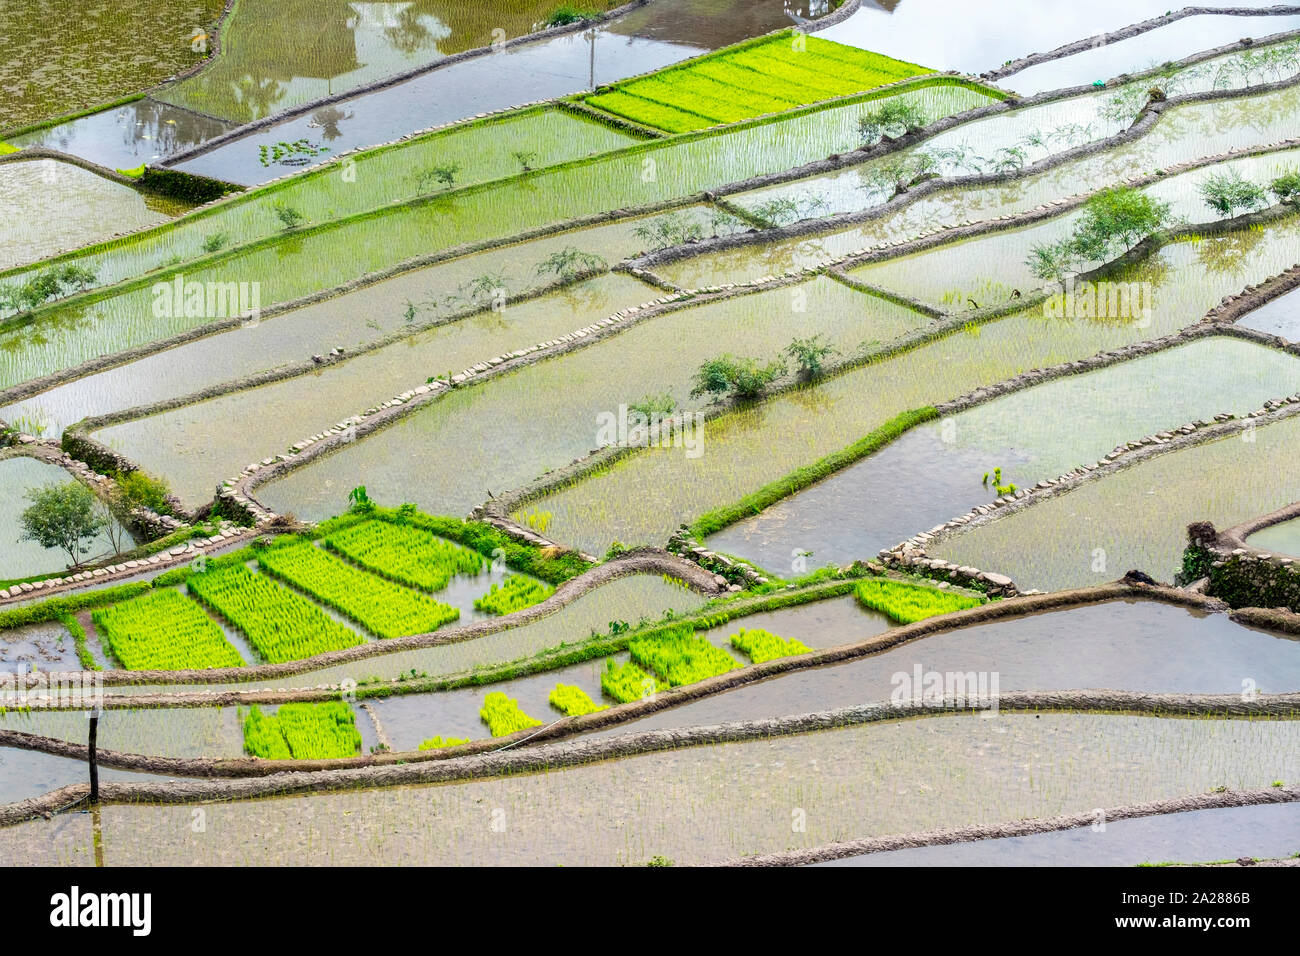 Elevated view of flooded rice terraces during early spring planting season, Batad, Banaue, Mountain Province, Cordillera Administrative Region, Philip Stock Photo